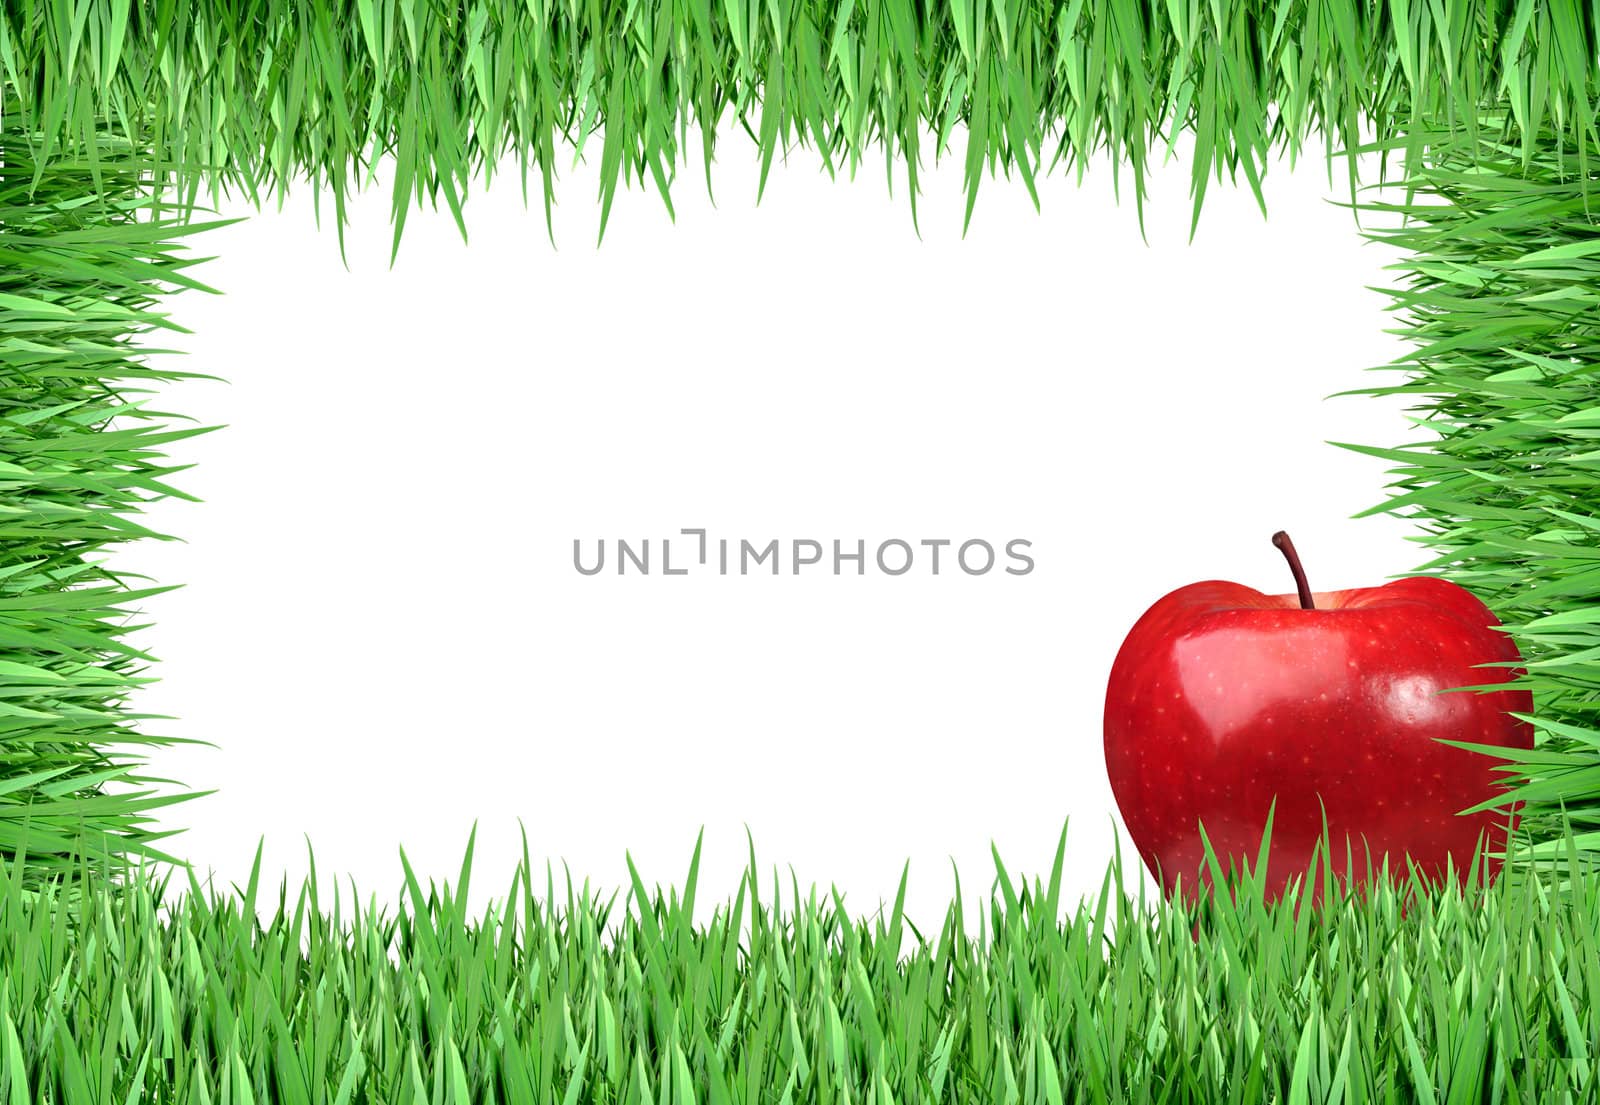 Over view of grass on white background 
 by rufous